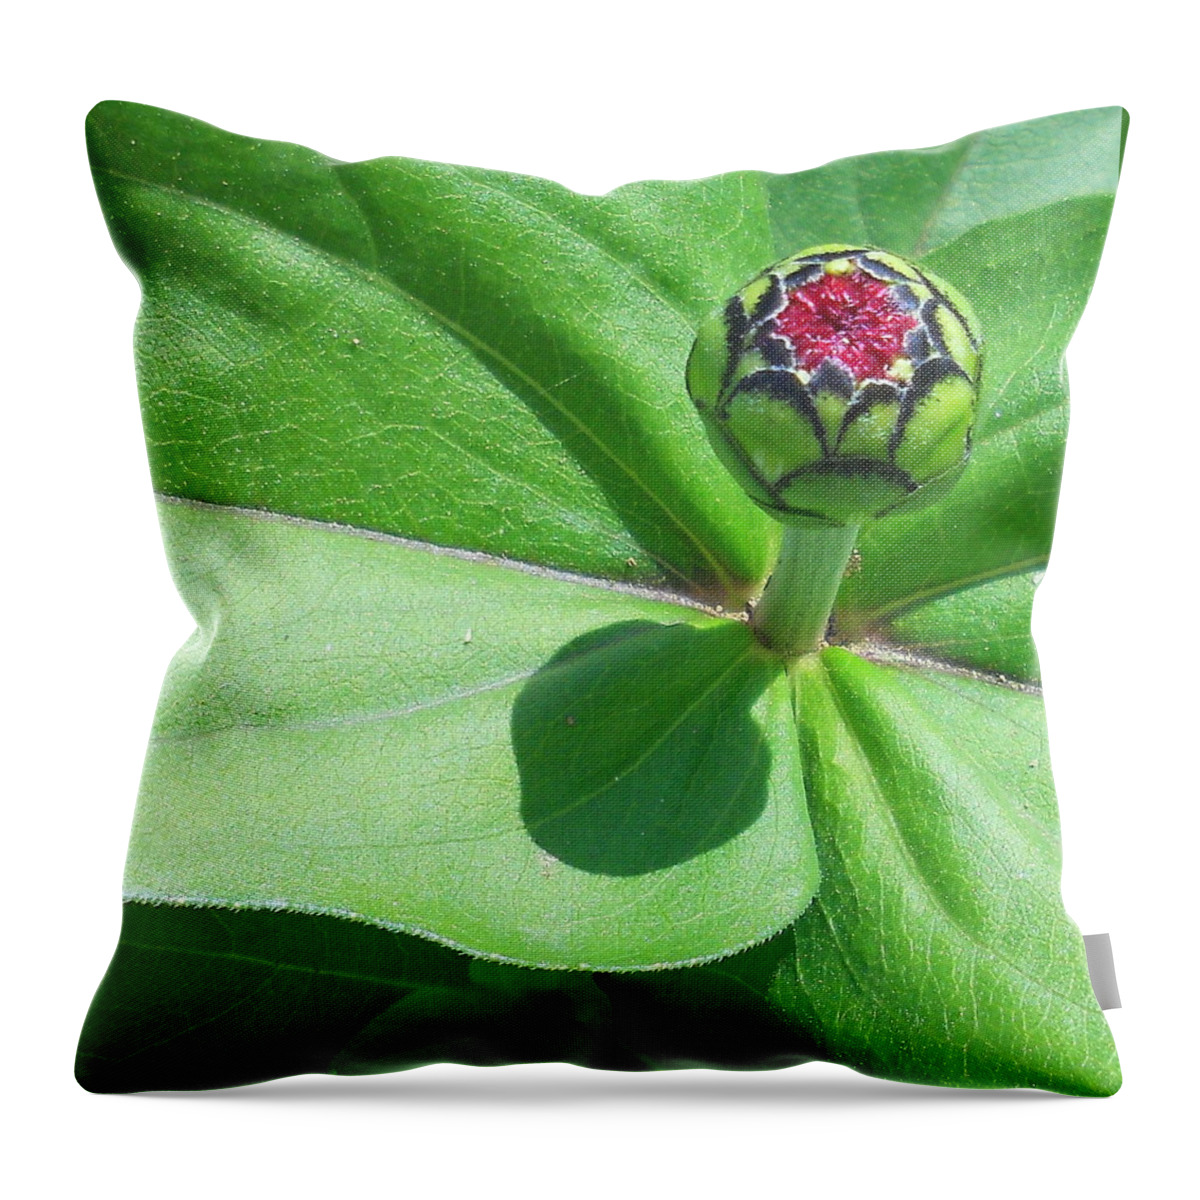 Flower Throw Pillow featuring the photograph My Bud by Diannah Lynch